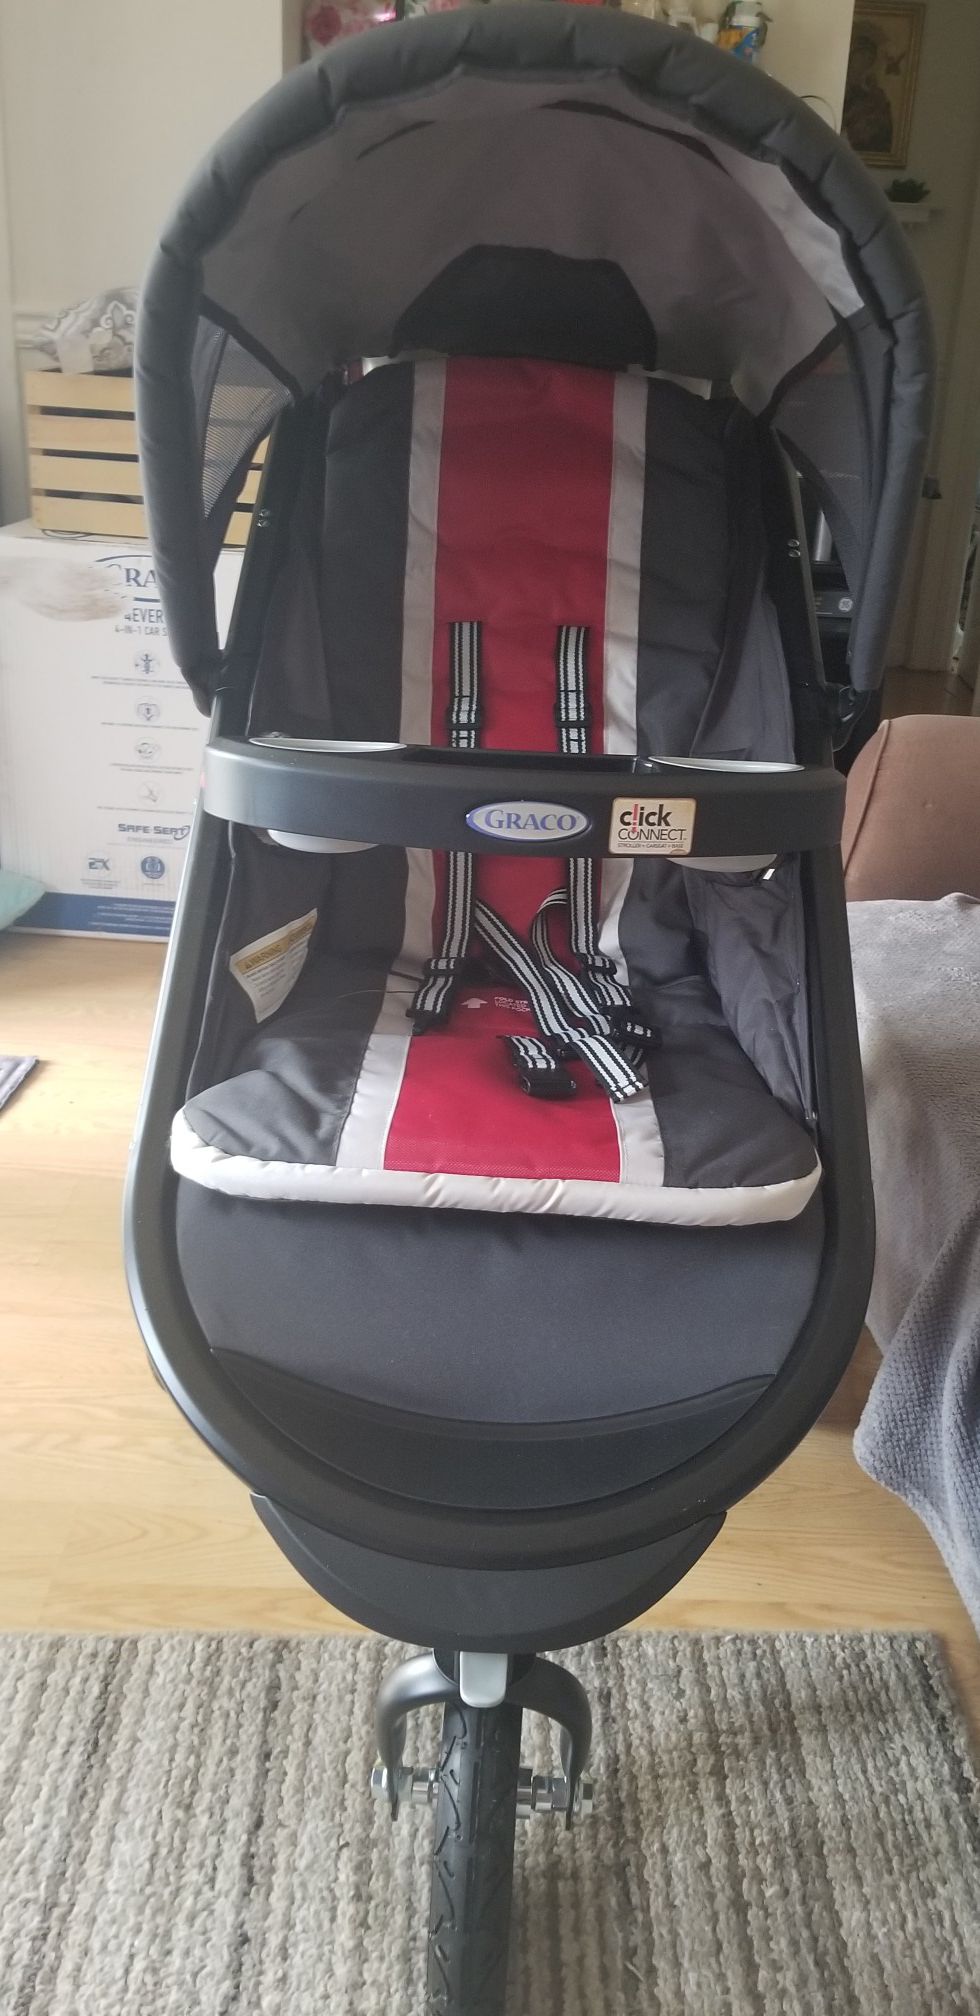 Graco jogger stroller - Click connect Never used.